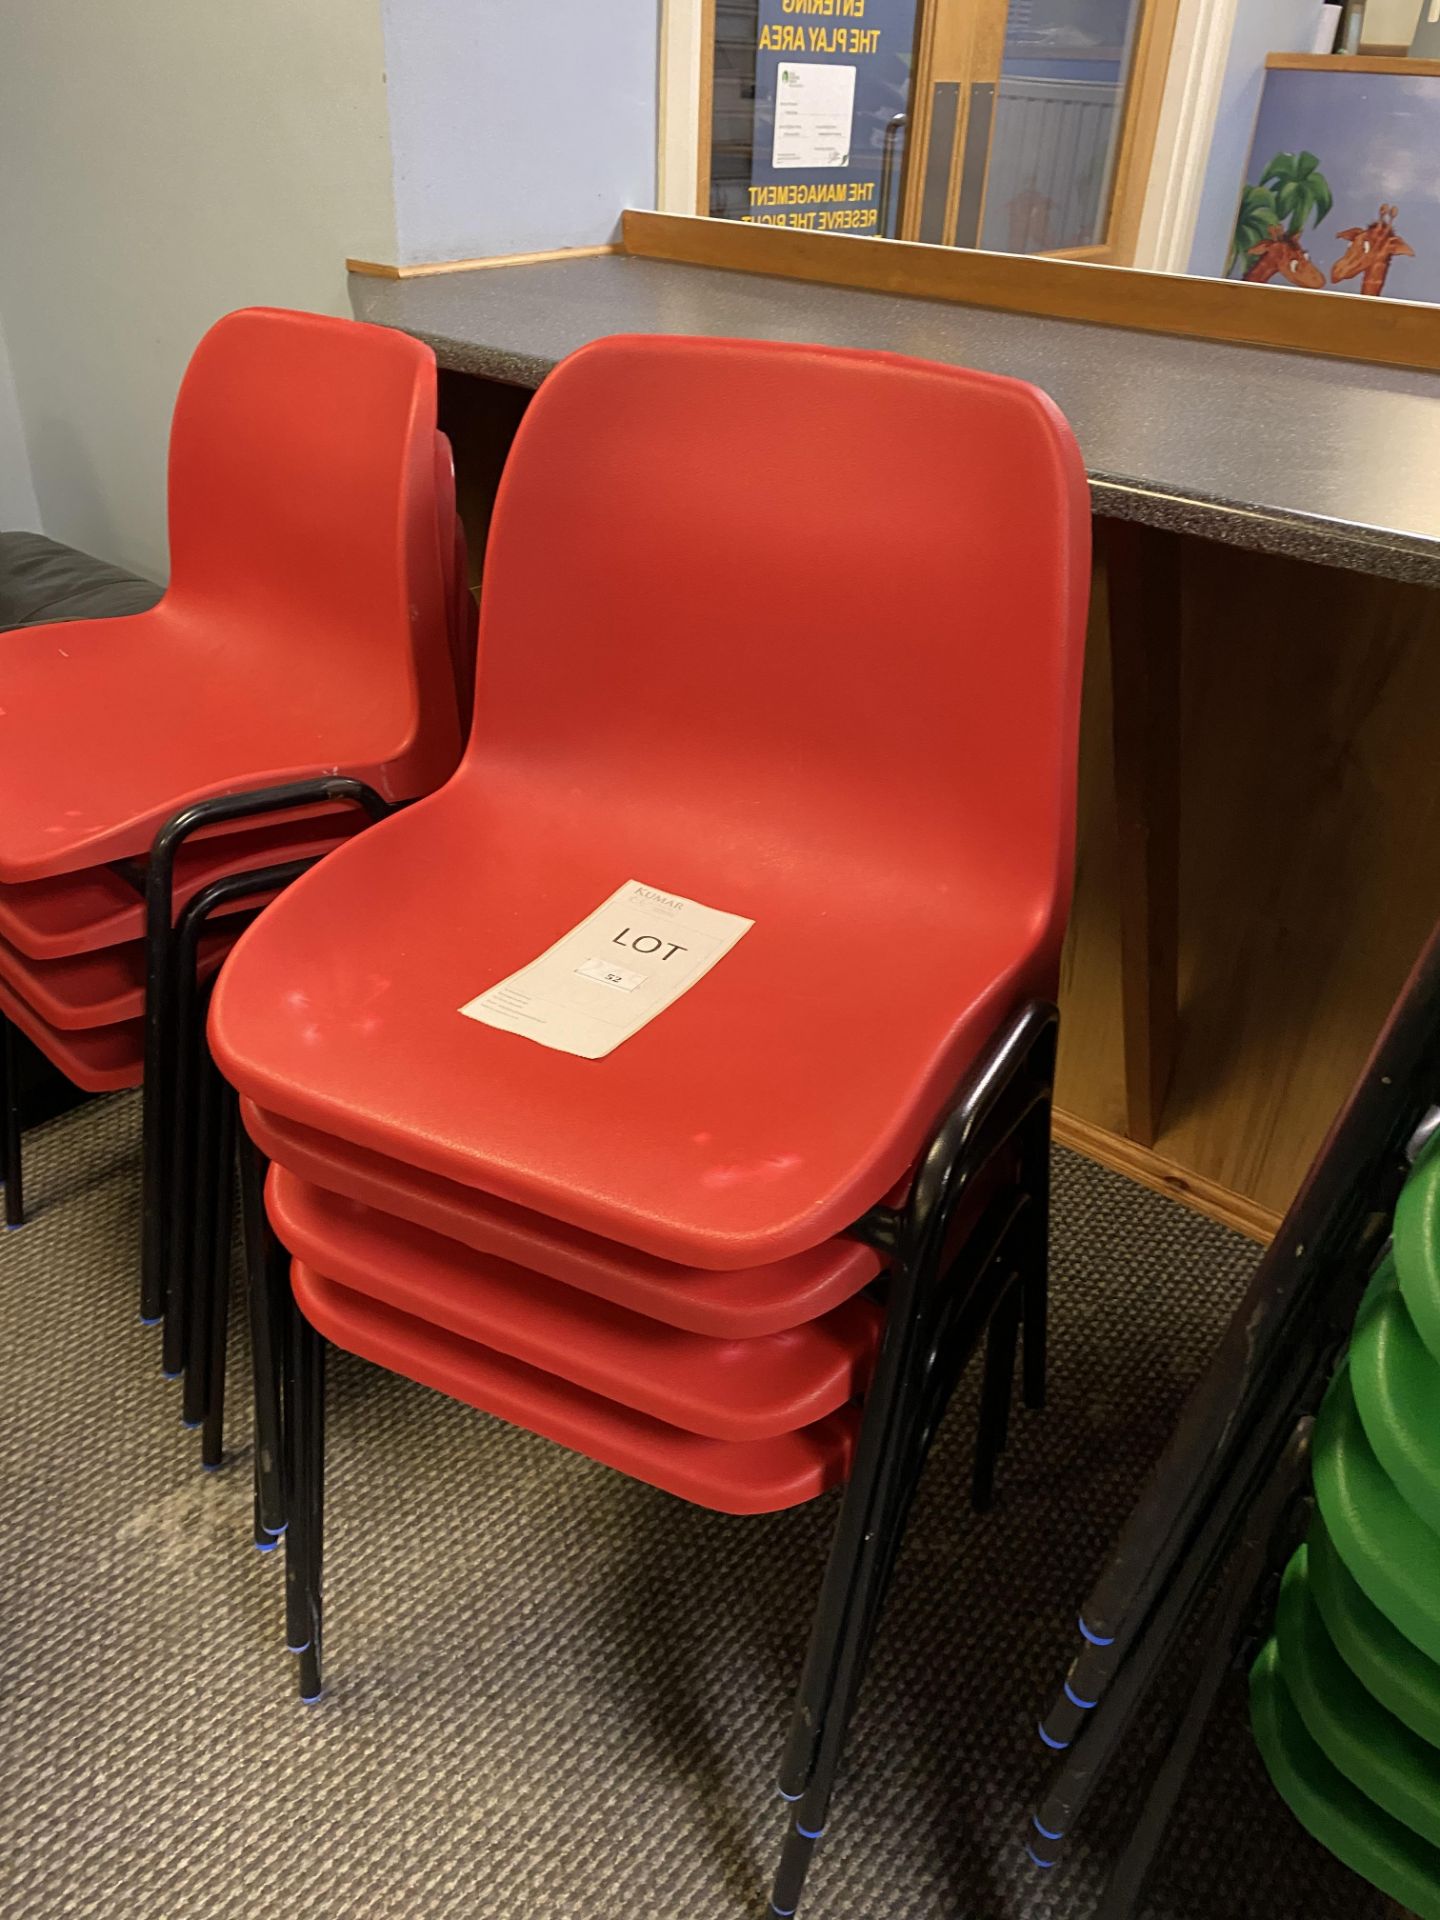 13x Red Plastic Chairs - Image 2 of 5